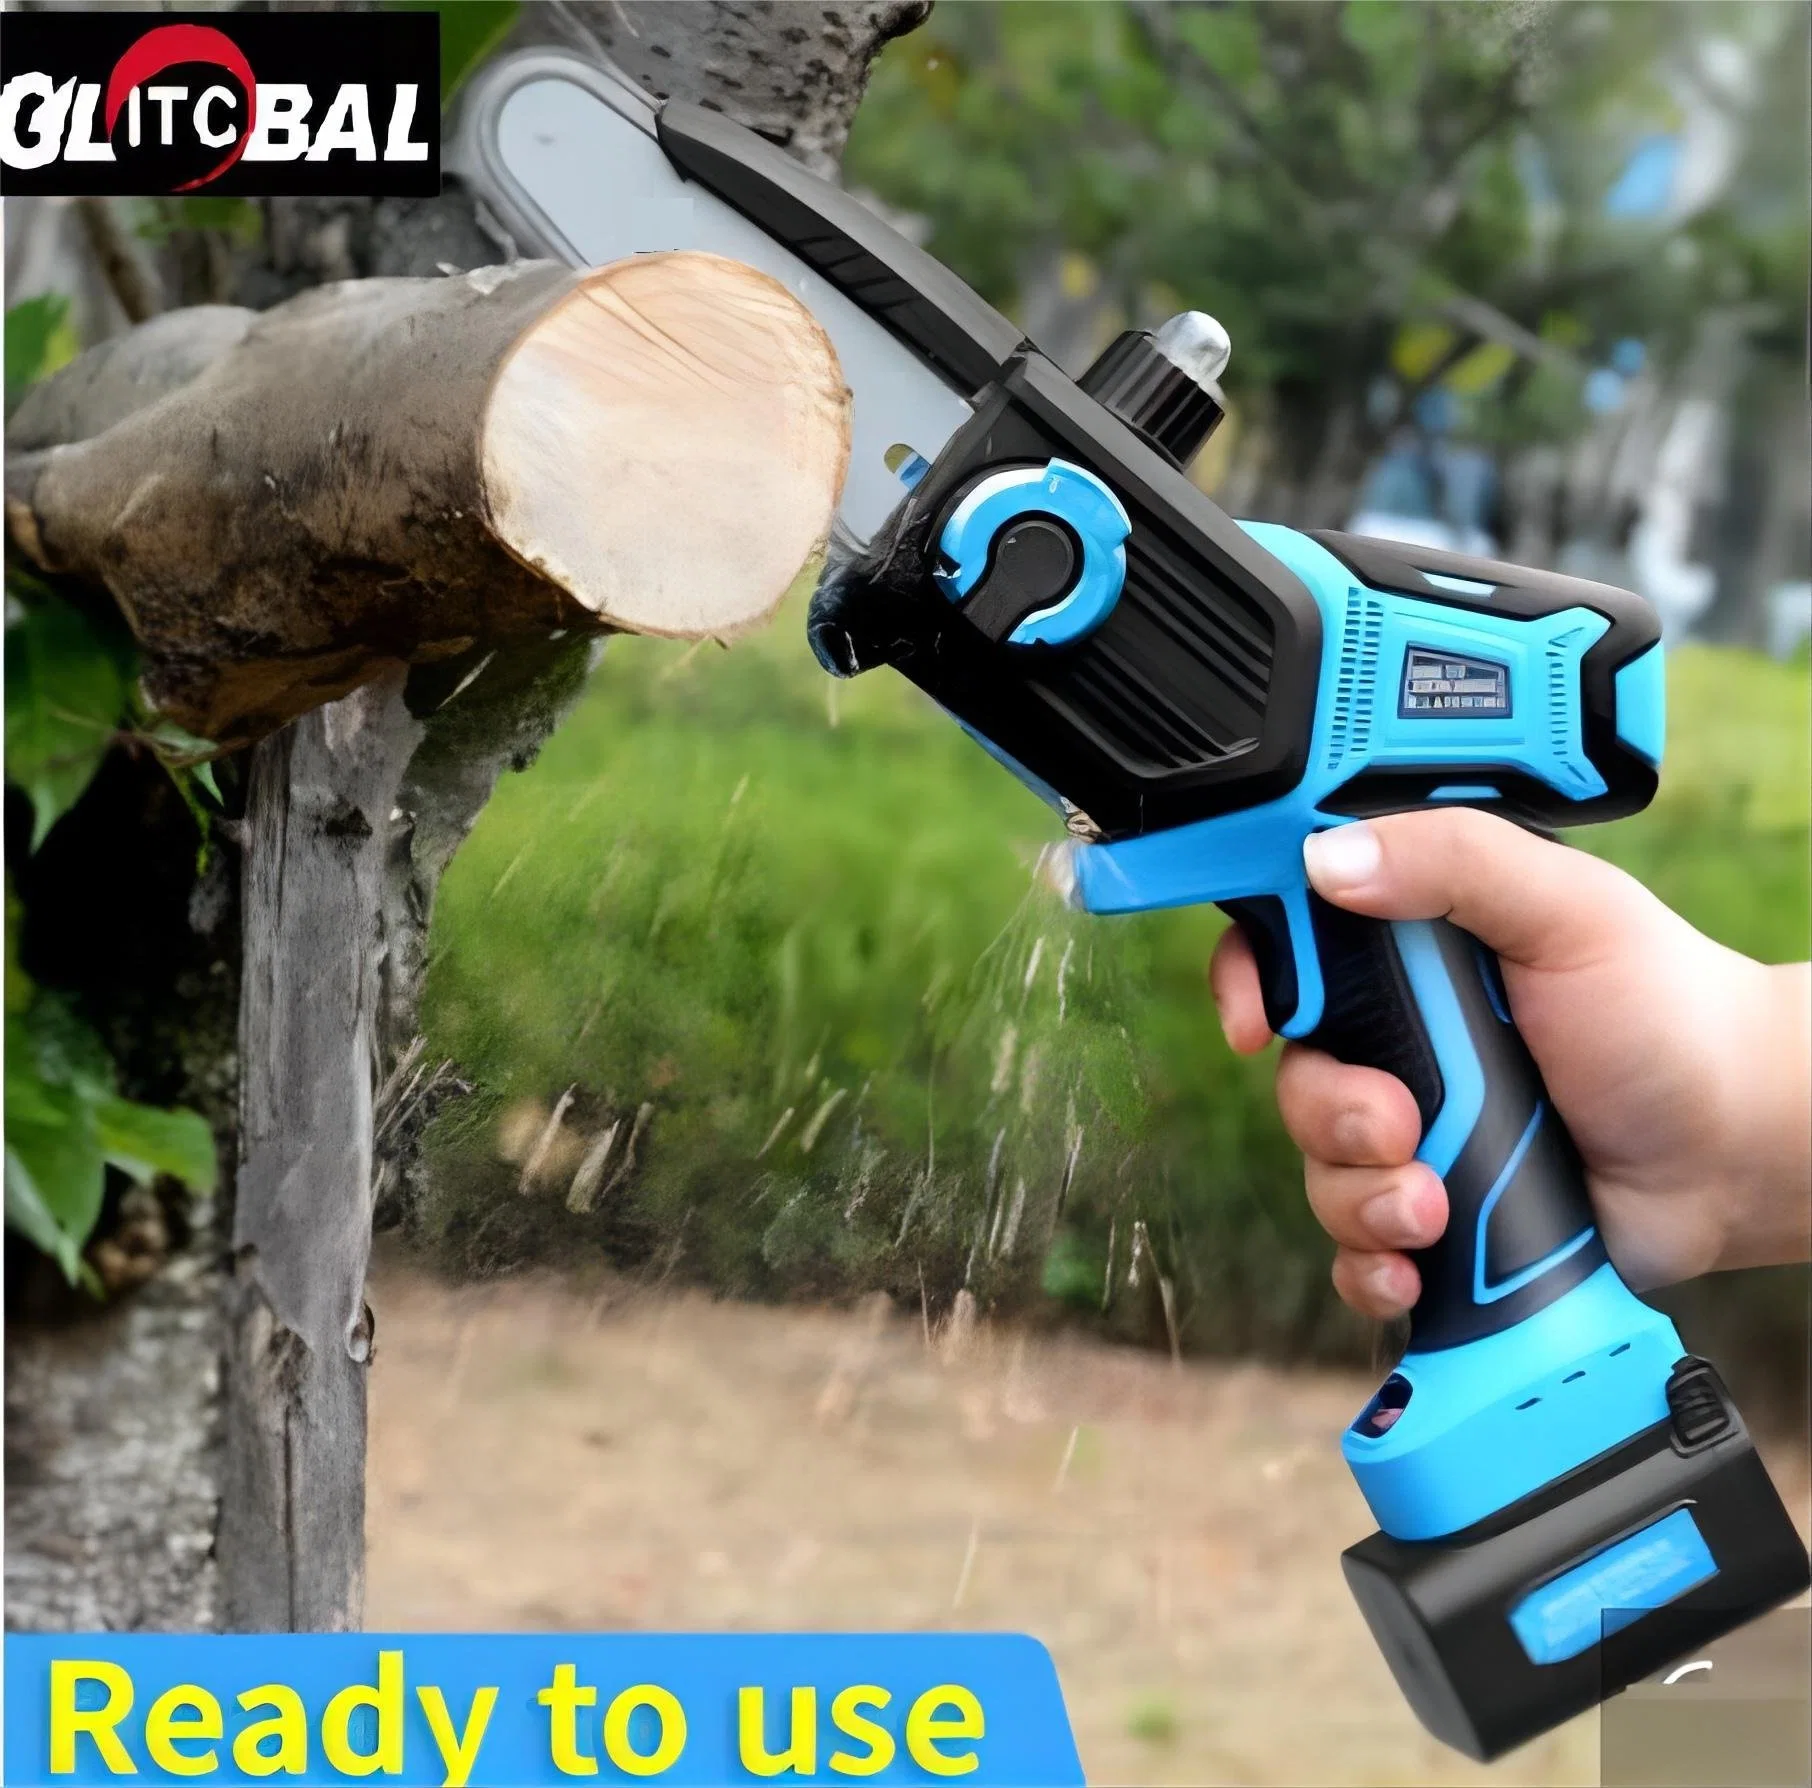 10% off-Unique-Design New Product-Li-ion Battery-Cordless/Electric-2in1 Multi-Garden Power Tool Set-Short/Long-Reach-Lopper/Chainsaw